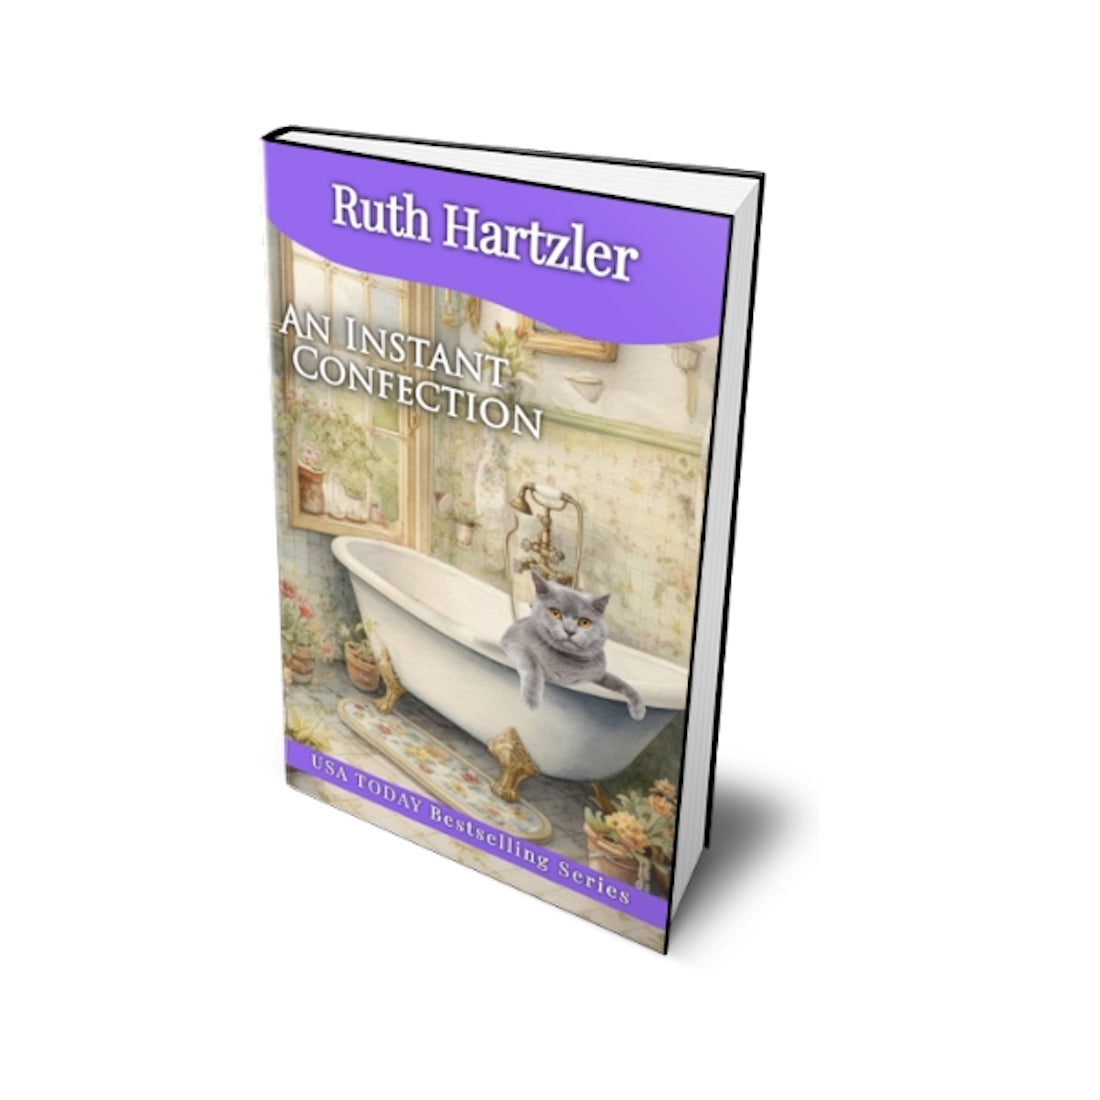 An Instant Confection PAPERBACK cozy mystery ruth hartzler